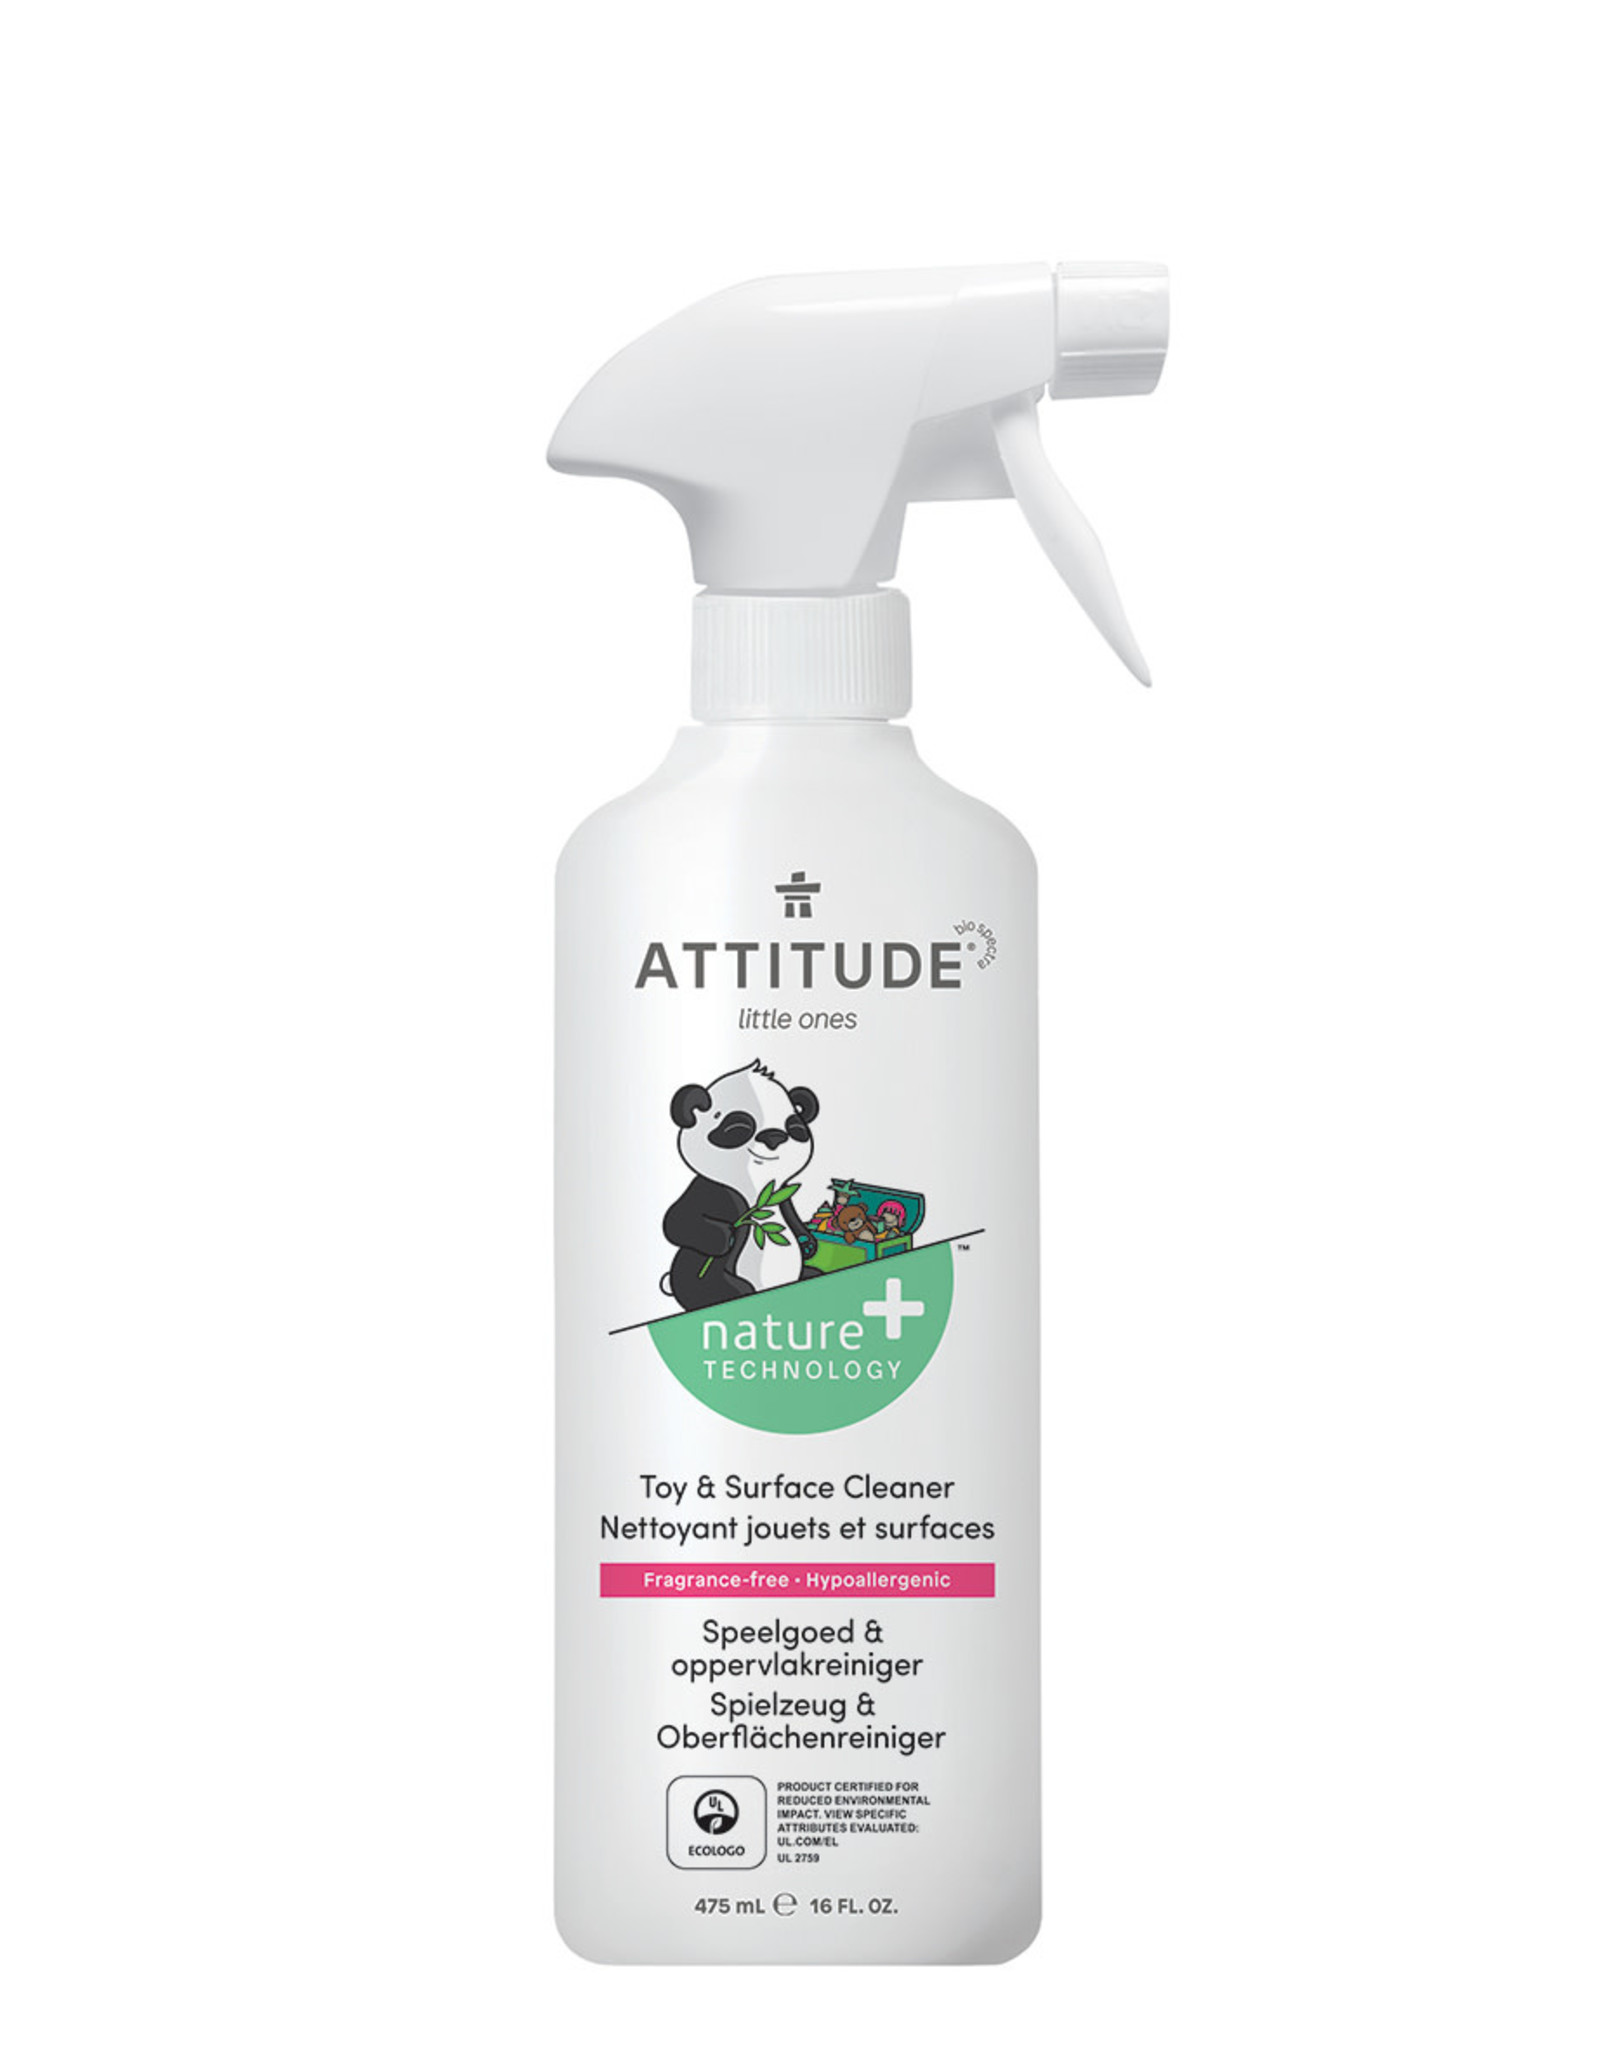 Attitude Attitude Little Ones Toy & Surface Cleaner 475 ml